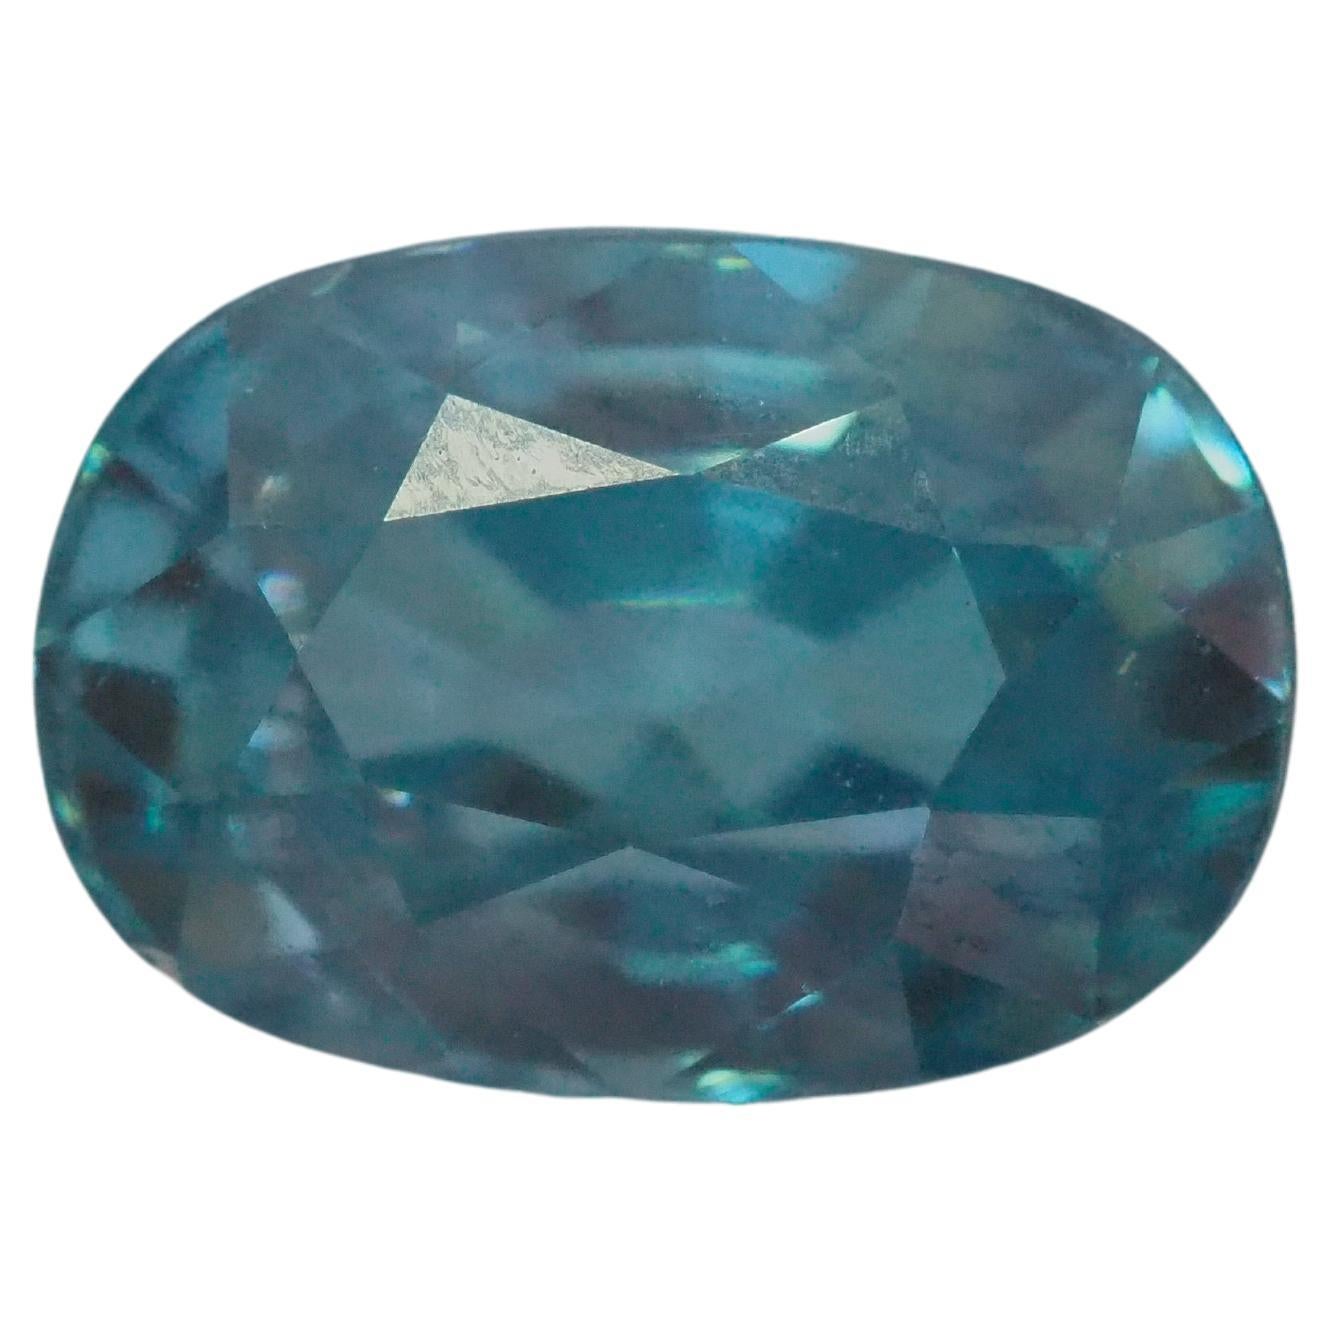 AIGS Certified 4.80ct Oval Blue Zircon, 10.27x7.09x5.89 mm For Sale